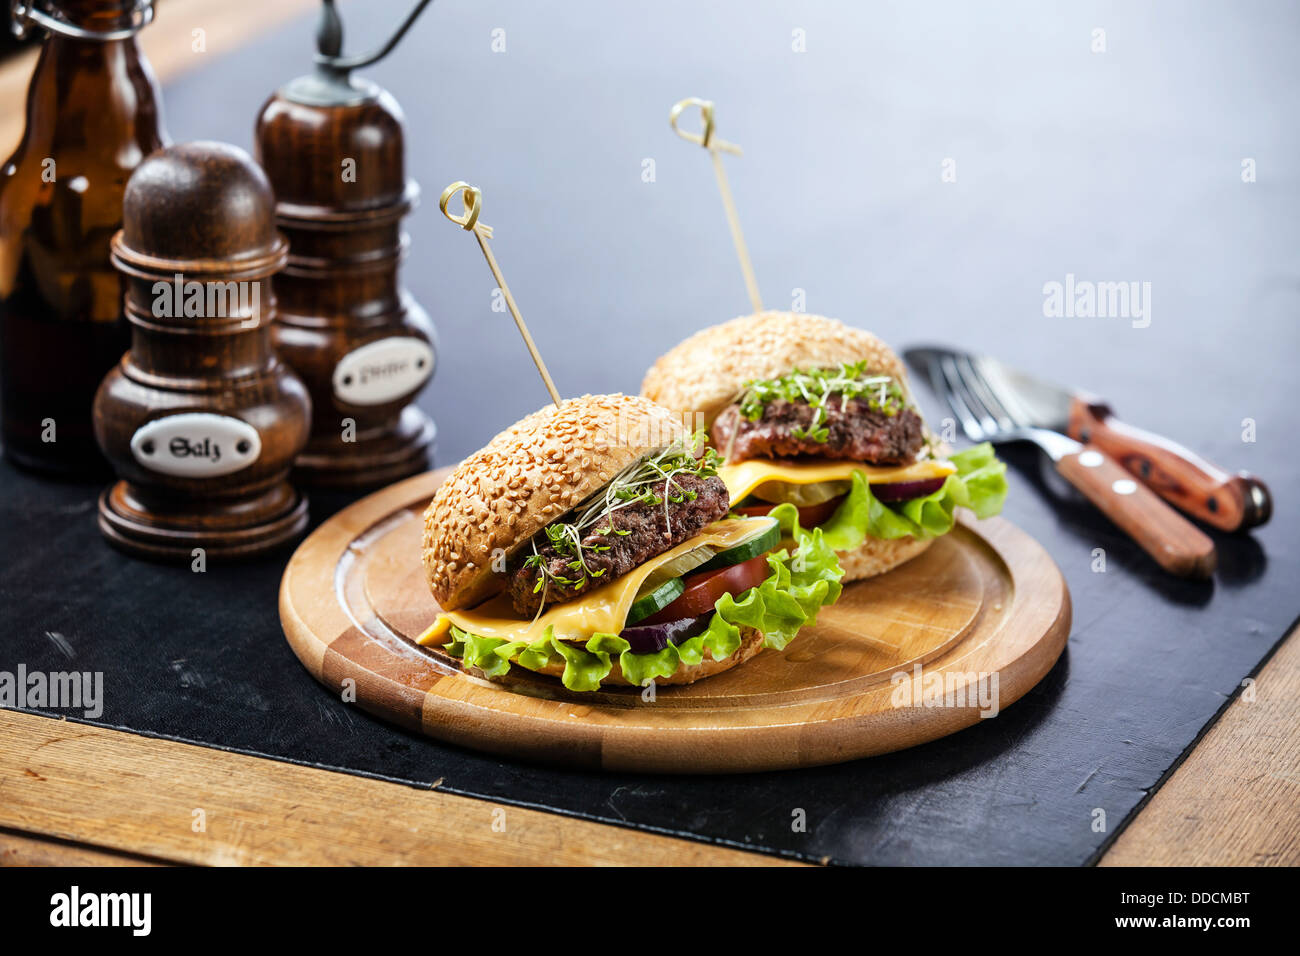 Two burgers with meat and greens Stock Photo